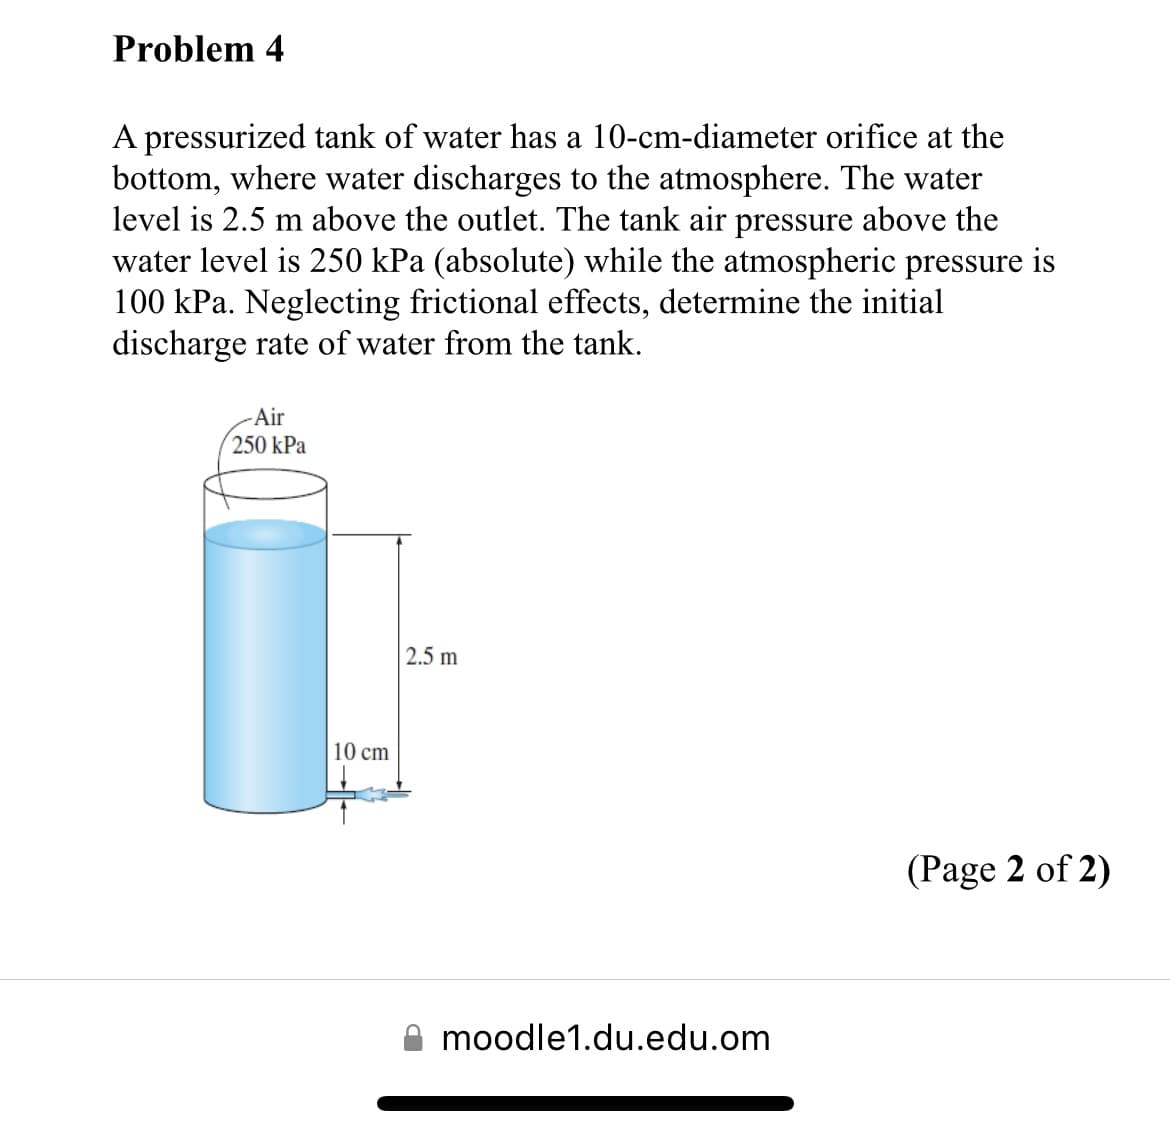 Problem 4
A pressurized tank of water has a 10-cm-diameter orifice at the
bottom, where water discharges to the atmosphere. The water
level is 2.5 m above the outlet. The tank air pressure above the
water level is 250 kPa (absolute) while the atmospheric pressure is
100 kPa. Neglecting frictional effects, determine the initial
discharge rate of water from the tank.
-Air
250 kPa
10 cm
2.5 m
moodle1.du.edu.om
(Page 2 of 2)